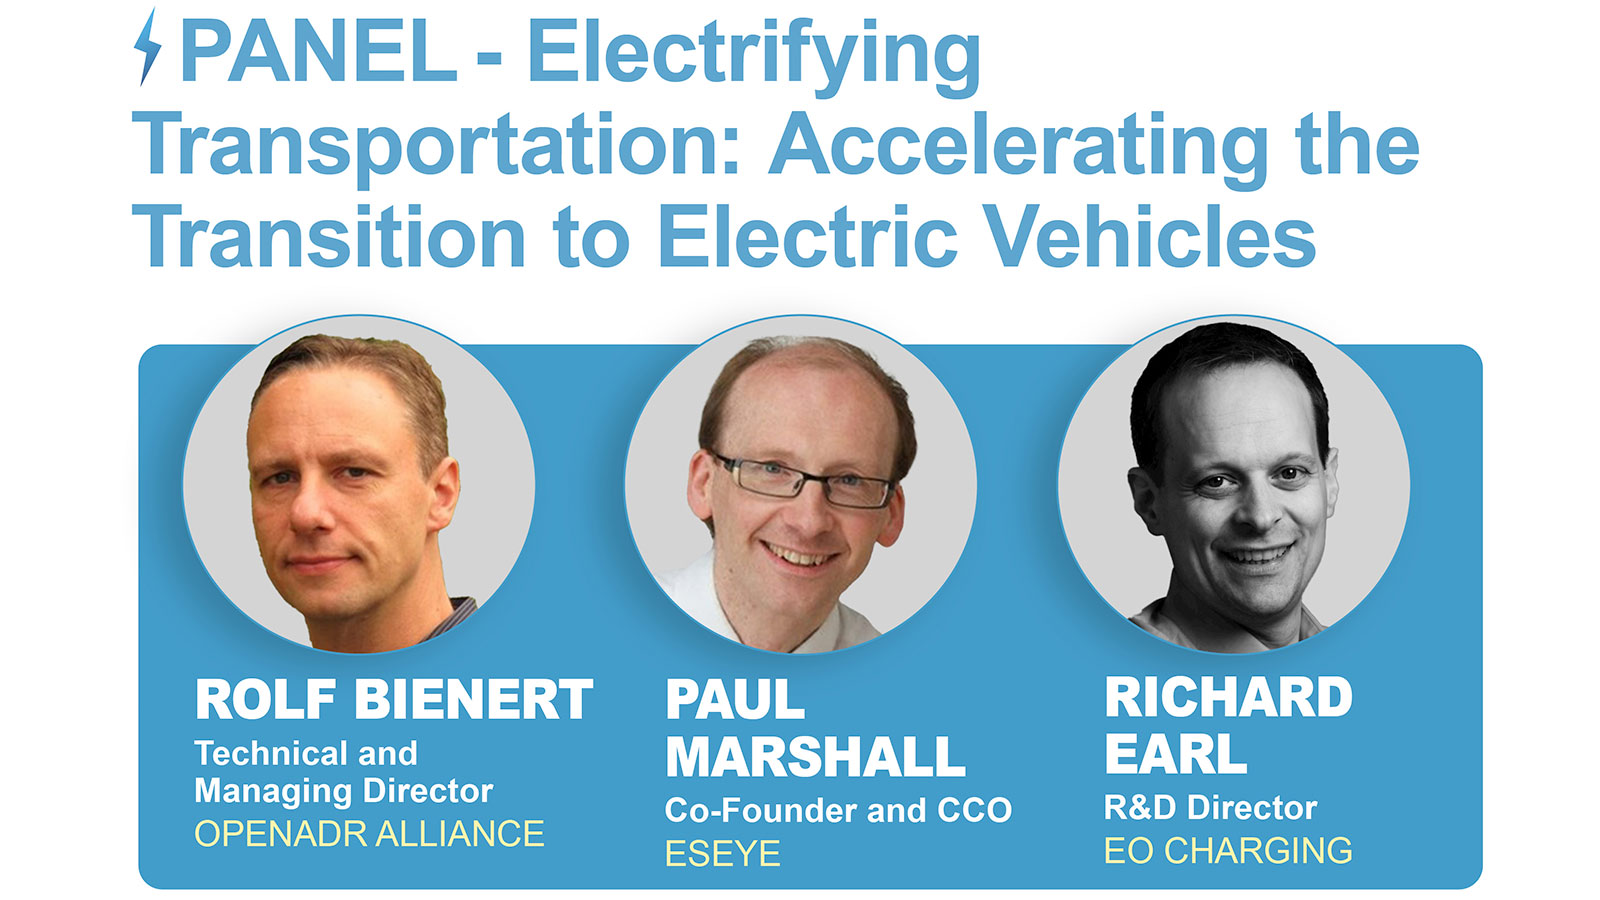 The upcoming Powered On: Sustainability event, scheduled for April 23, will feature a panel discussion focusing on the transition to electric vehicles.